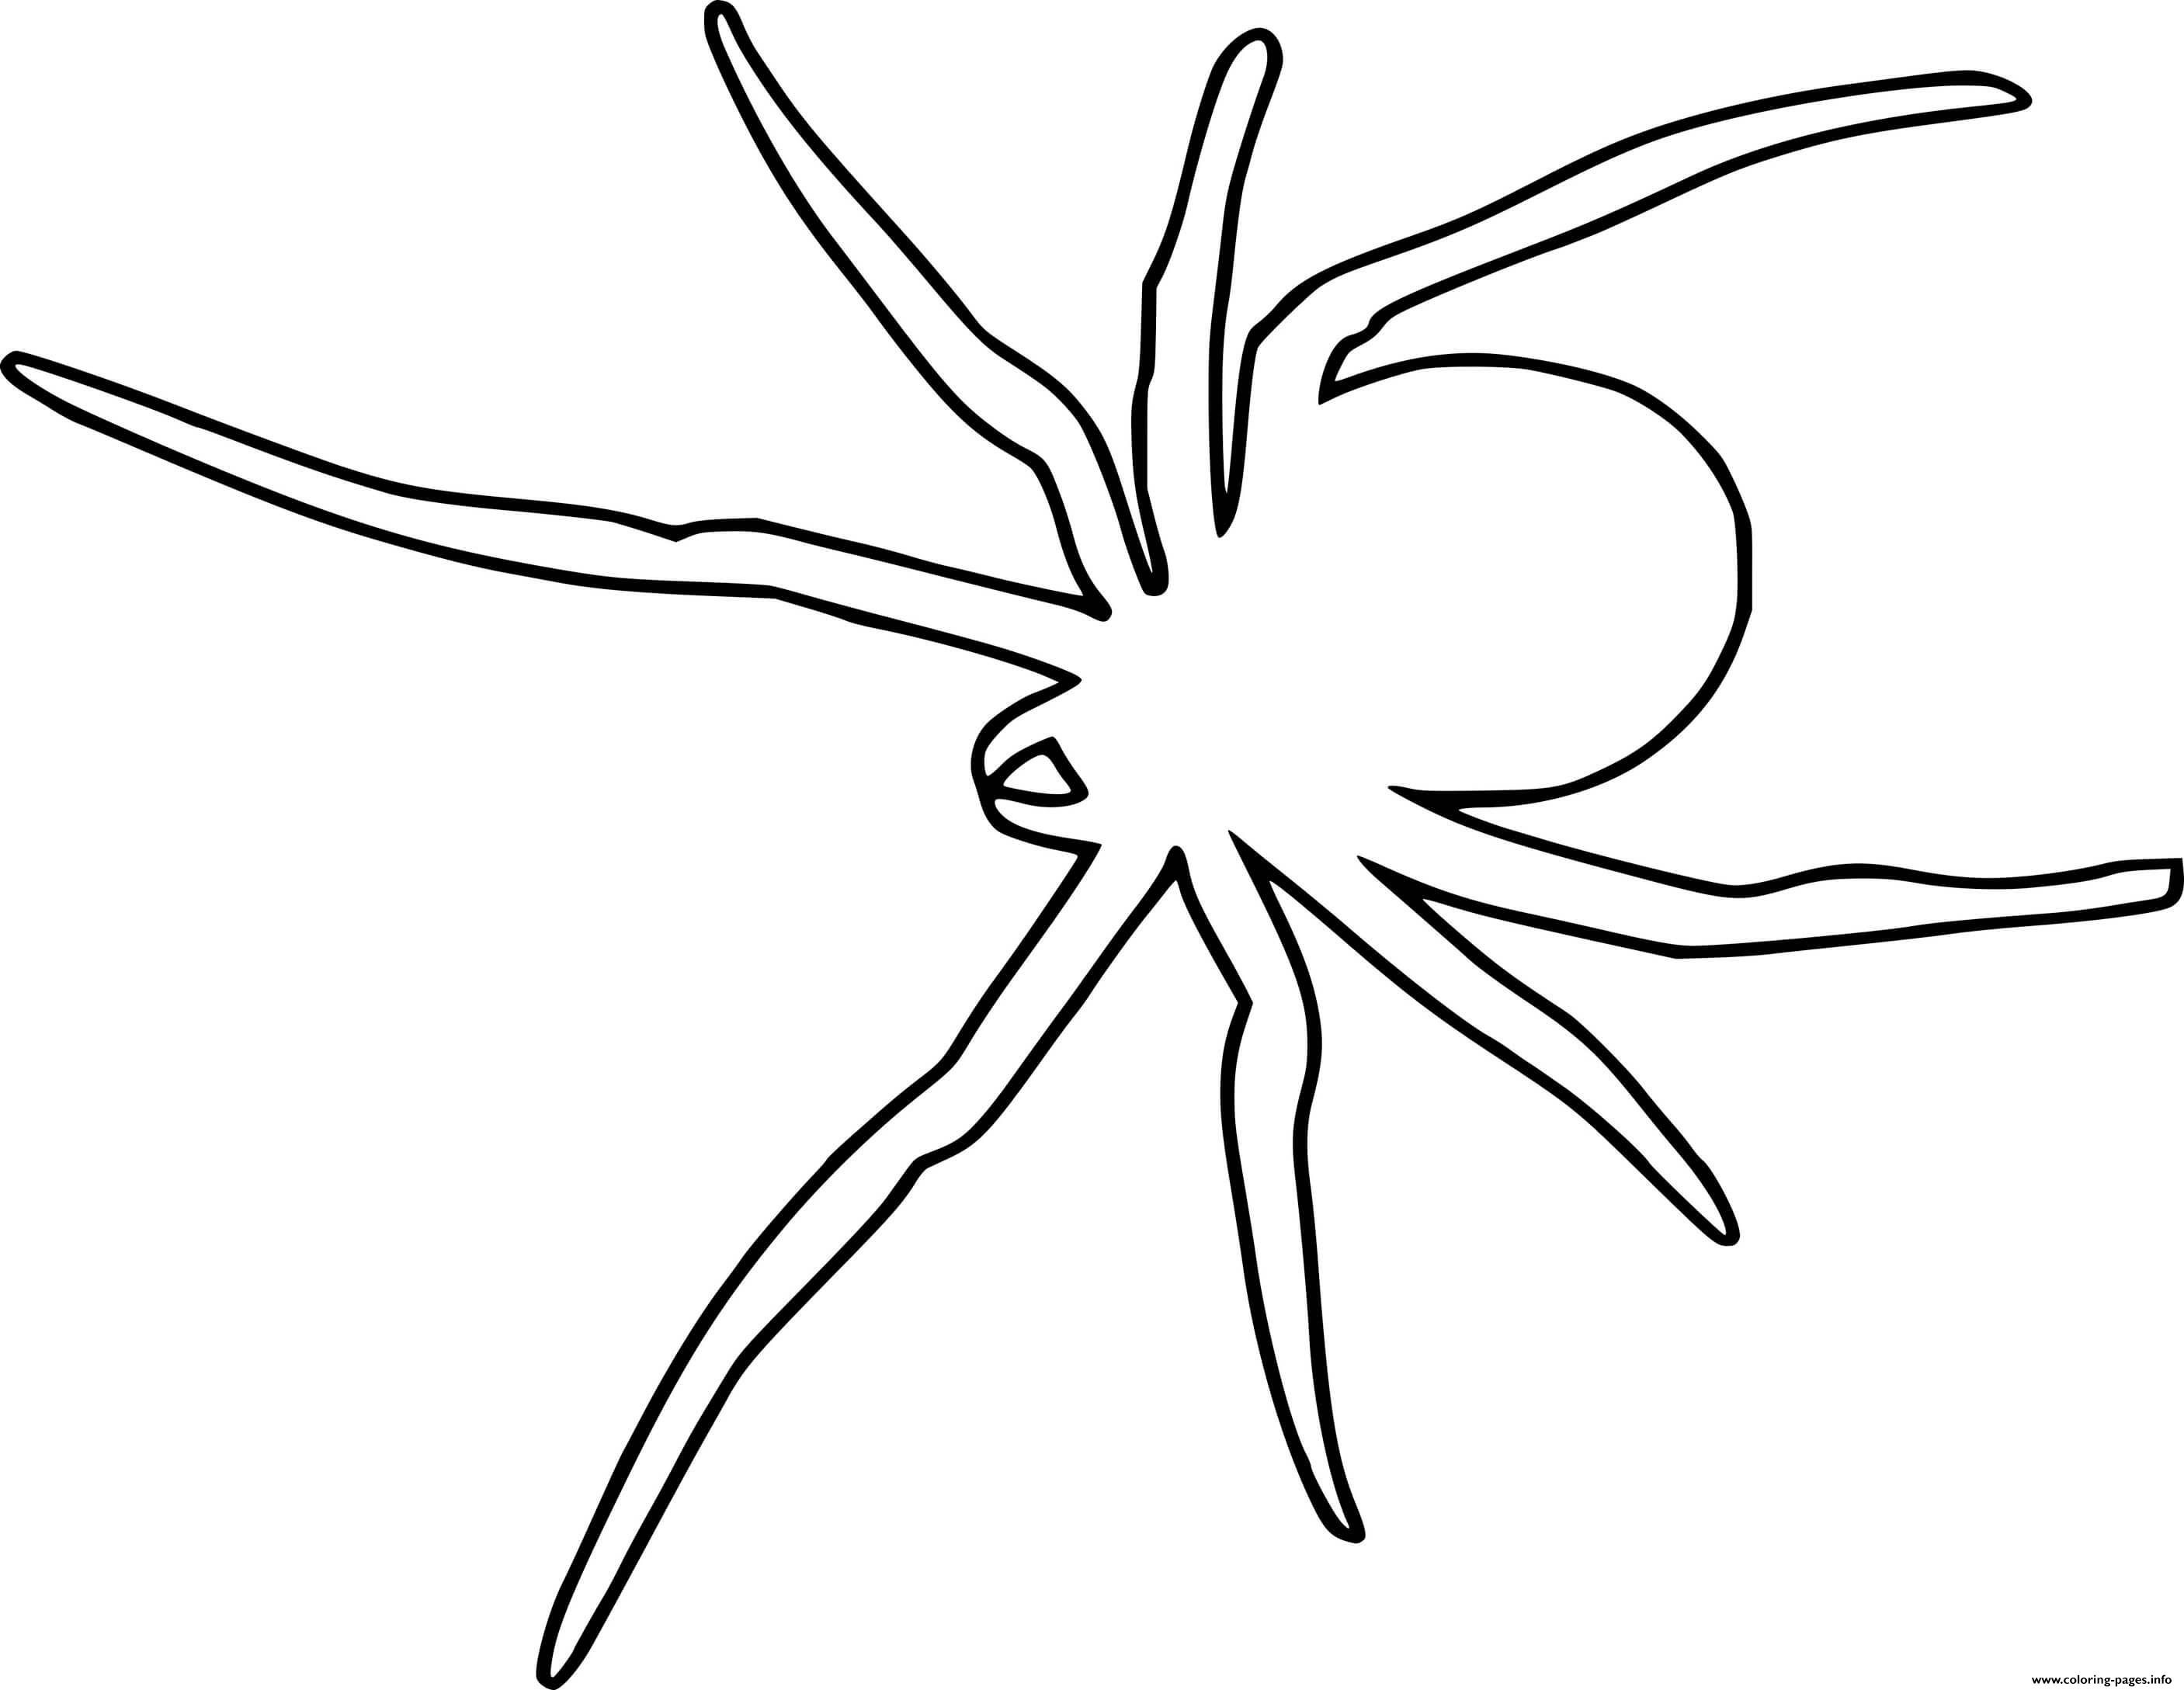 Scary Spider Outline coloring